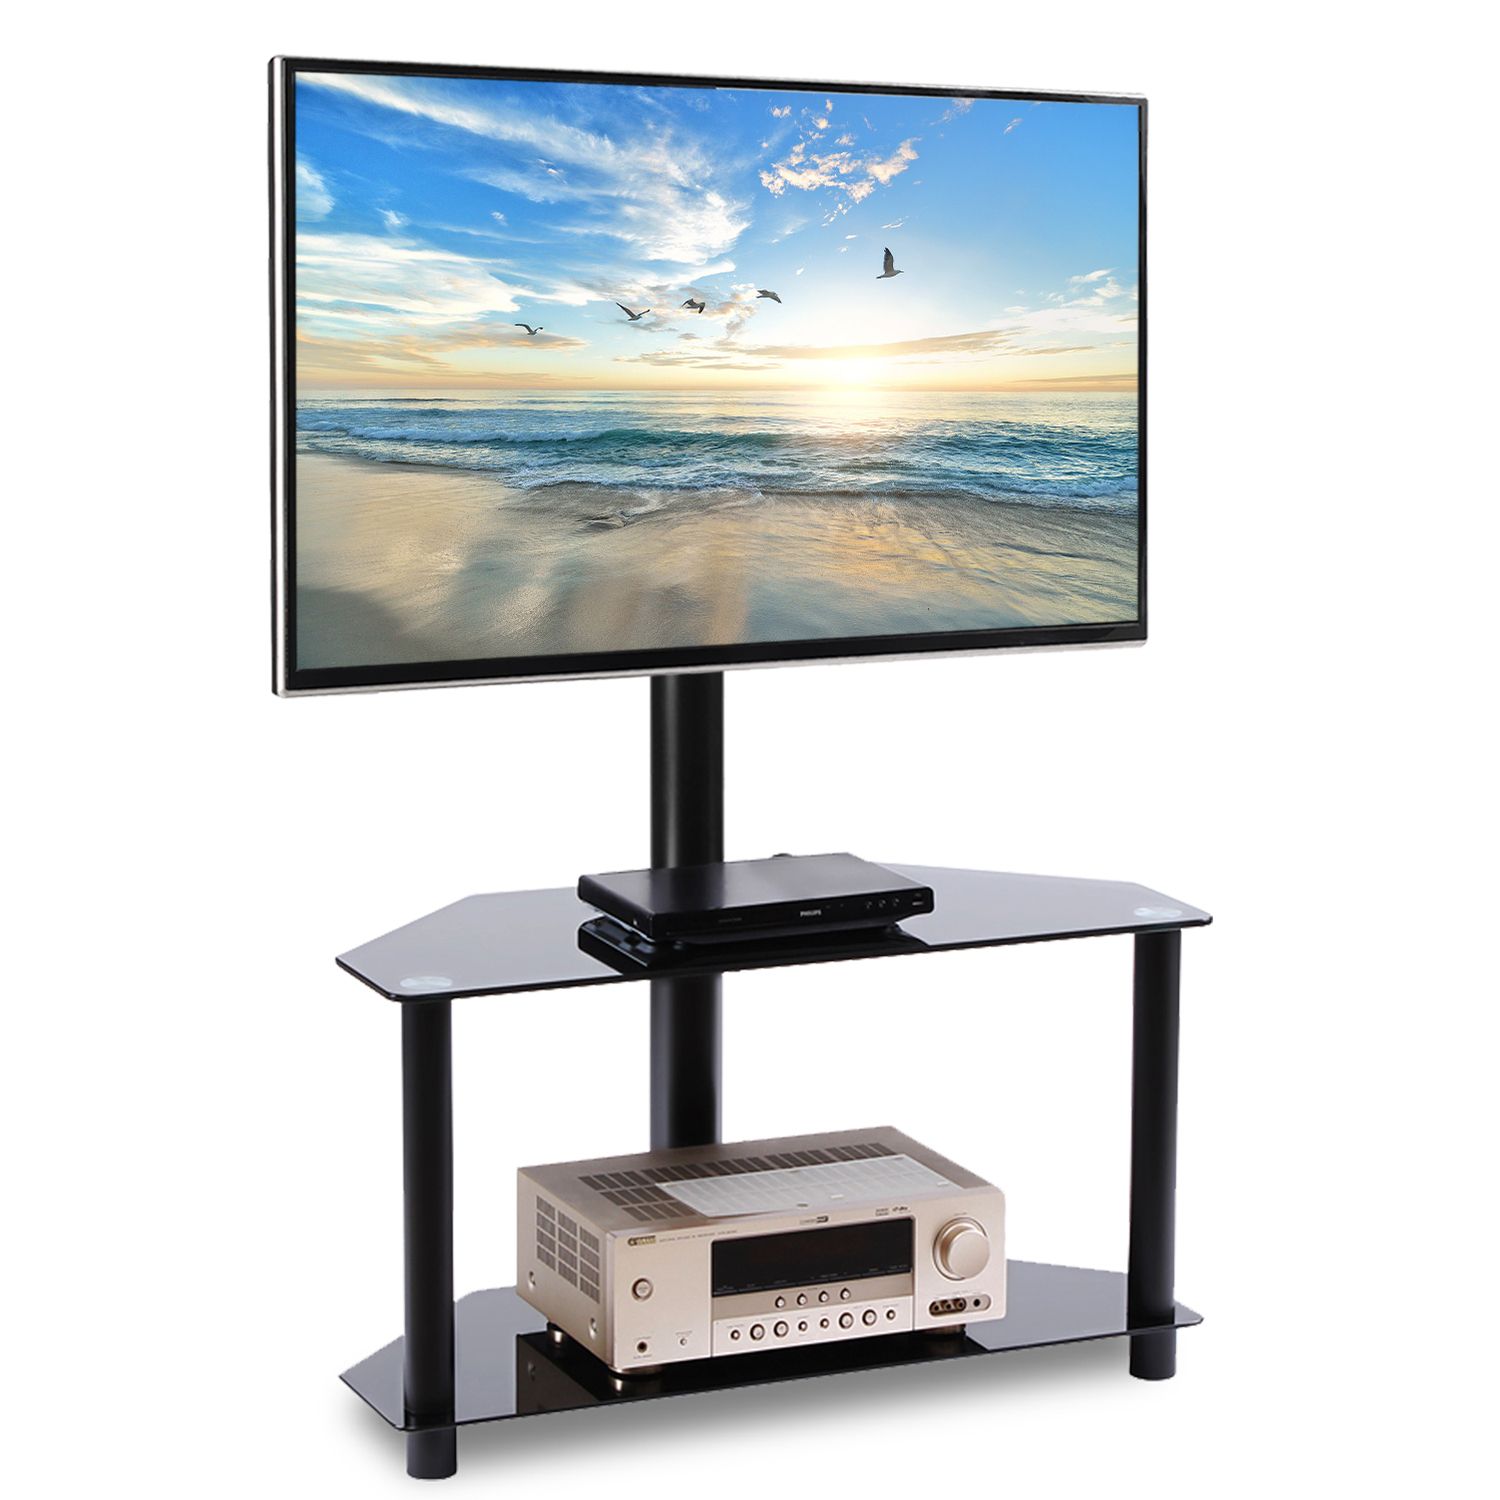 Swivel Corner Black Glass Tv Stand With Mount For 32 To 55 With Regard To Corner Tv Stands For 46 Inch Flat Screen (View 6 of 15)